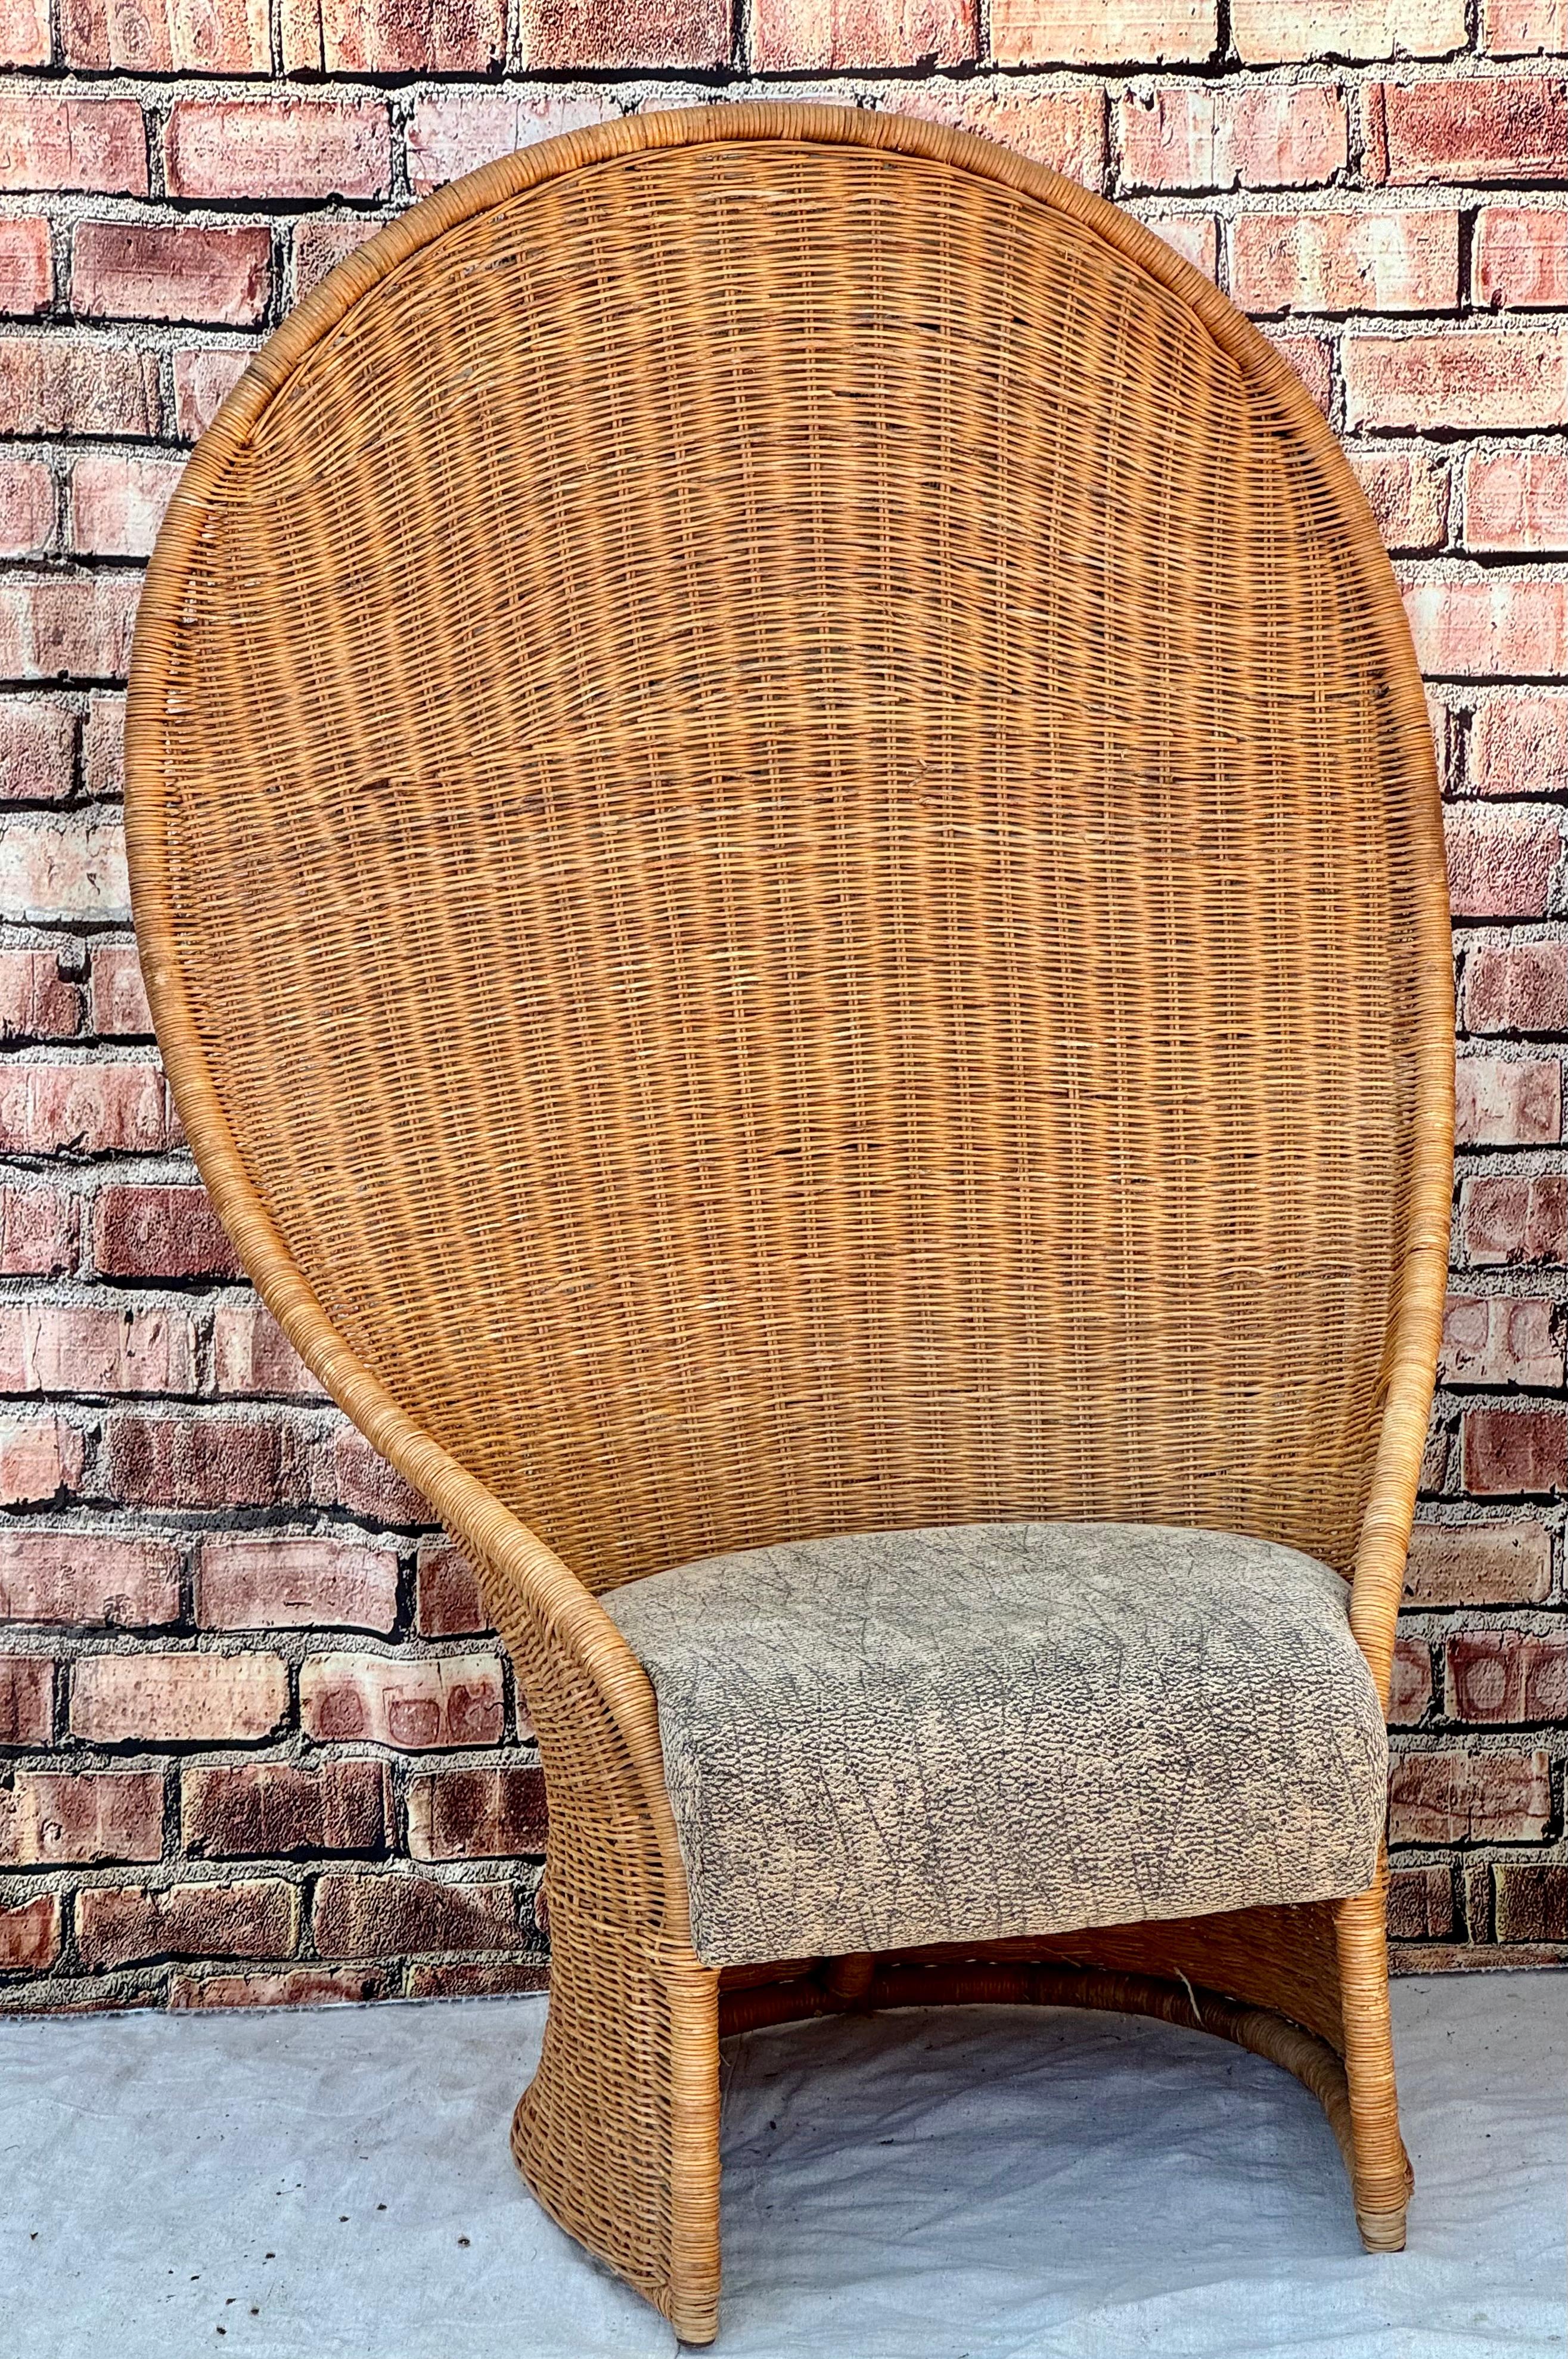 American Pair Of Mid-Century Modern Tall Rattan Wicker Peacock Chairs For Sale